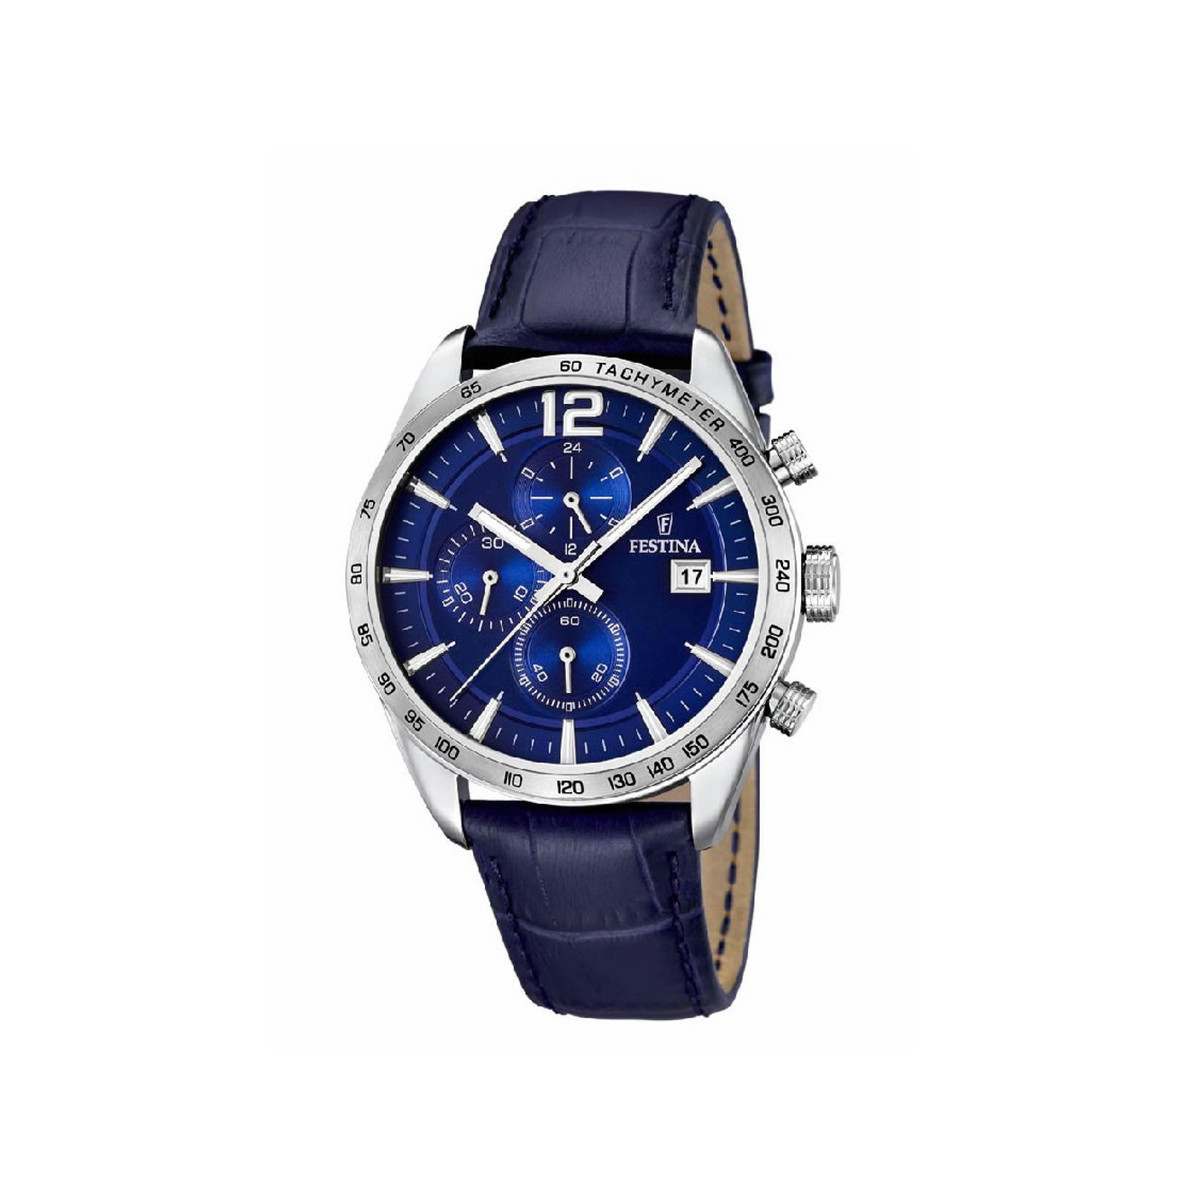 BLUE FESTINA WITH 44 MM CASE